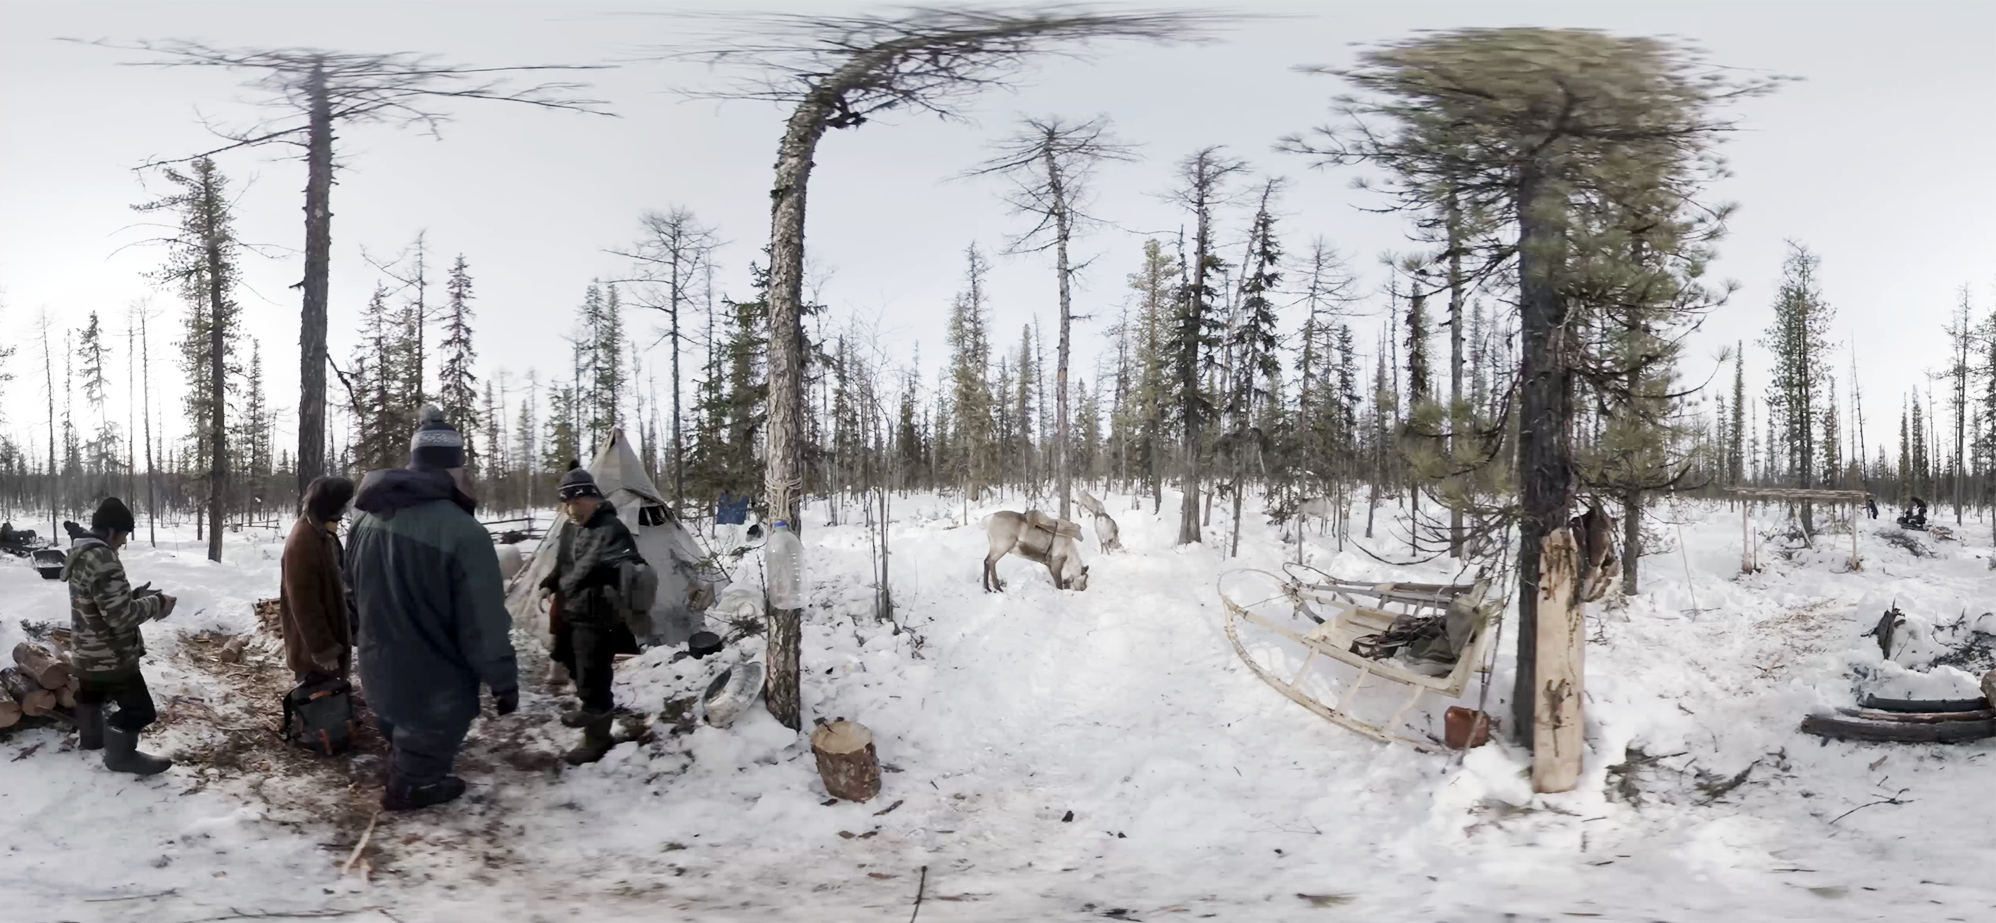 A group of people stand near reindeer and a sleigh surrounded by trees.